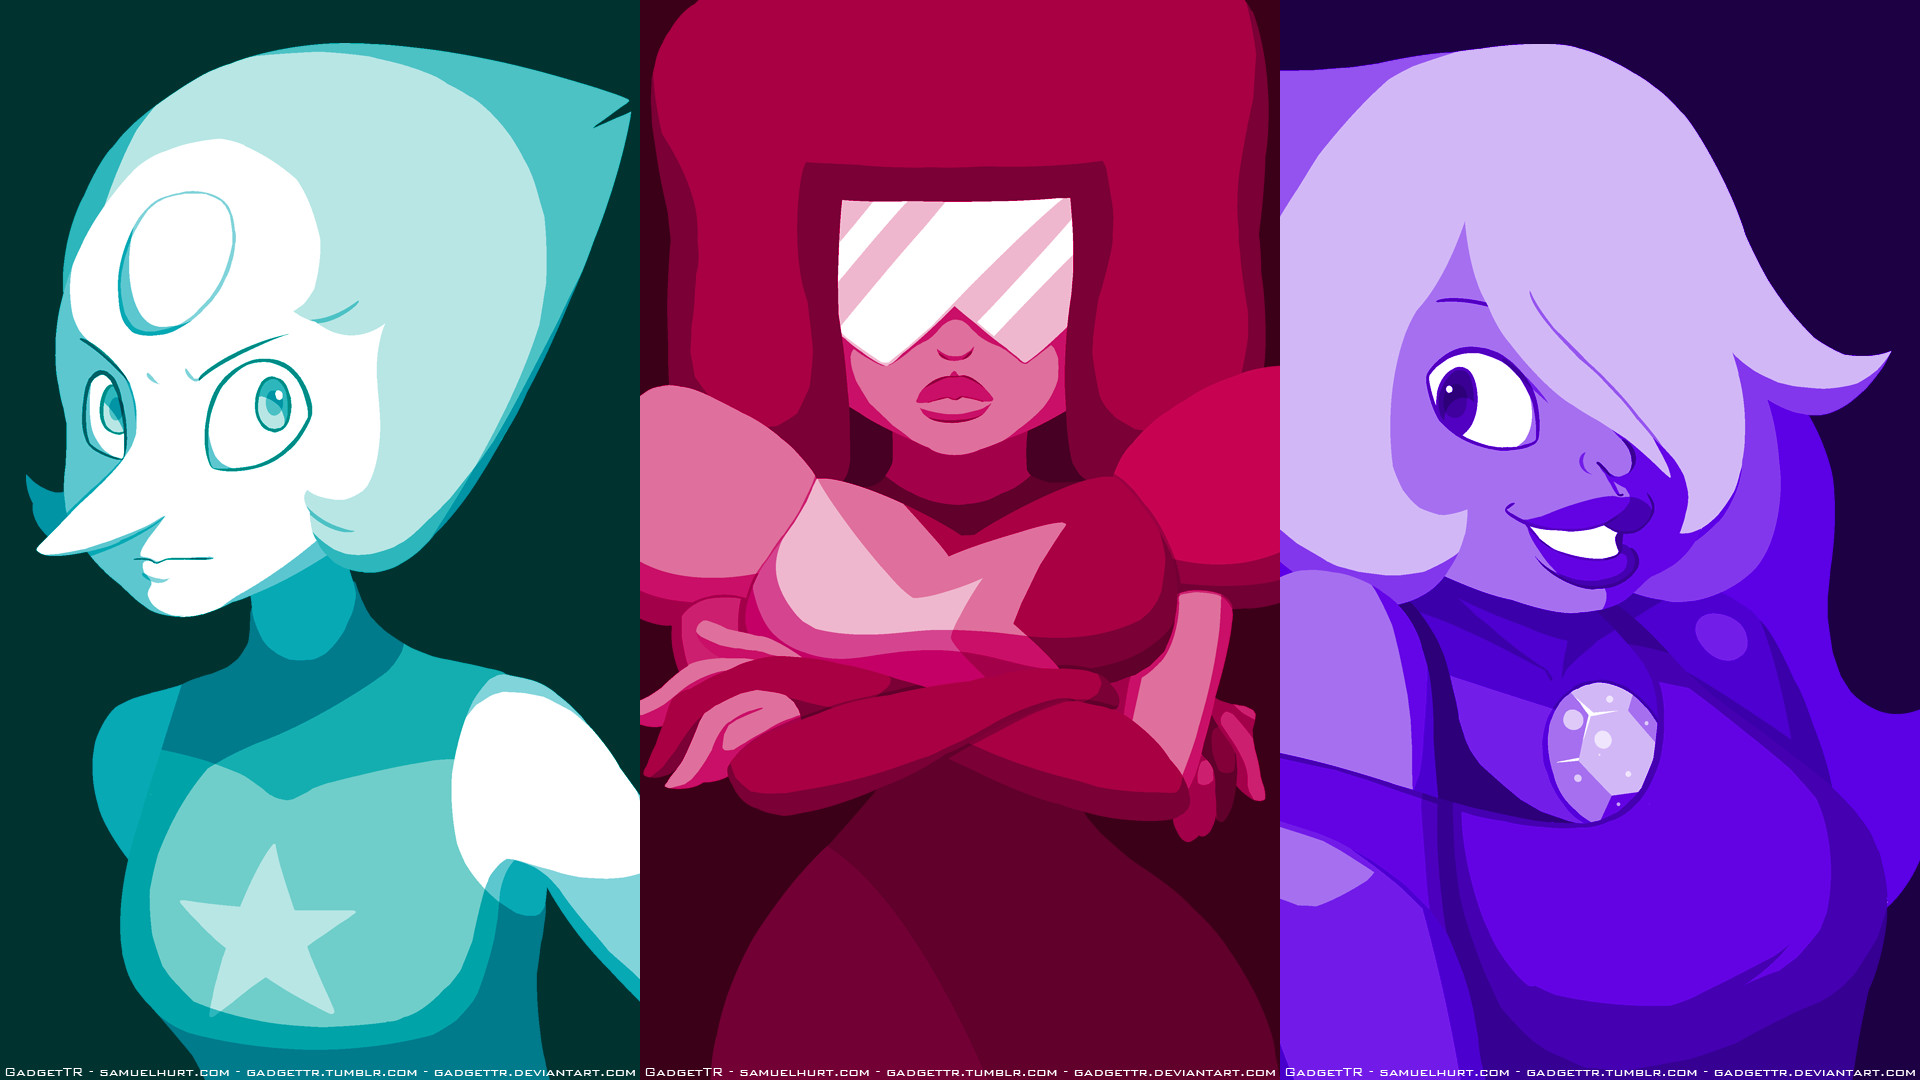 1920x1080 Pearl Steven Universe Quotes. QuotesGram 0 HTML code. Comes in   wallpaper size, which you can download here .